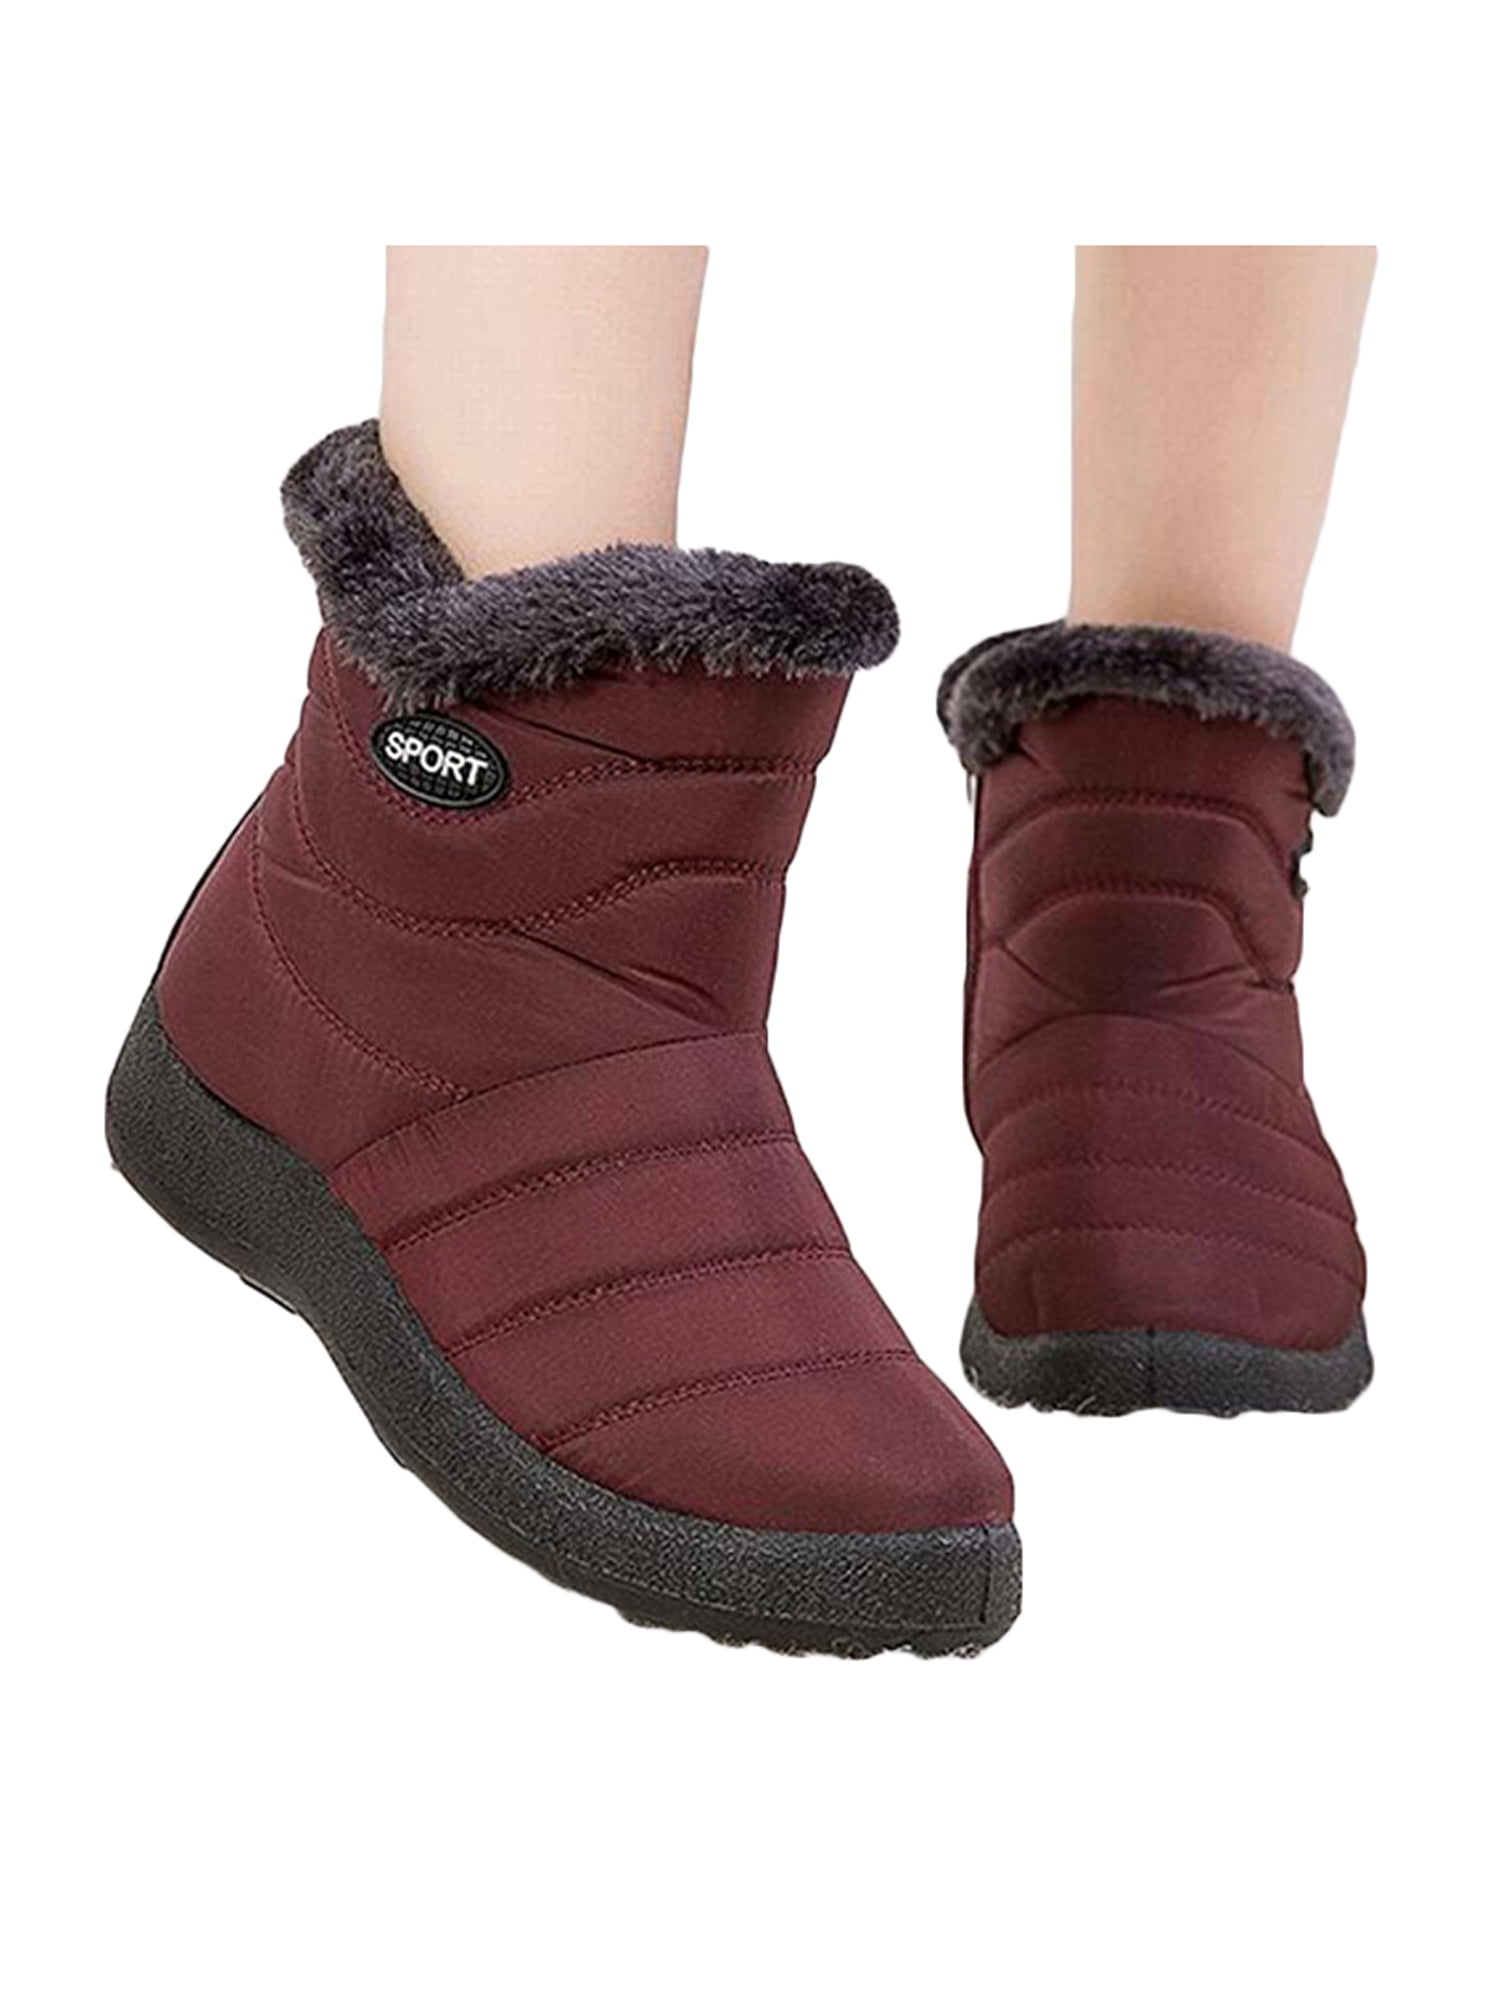 Winter Women Snow Boots Mid-Calf Solid Flats Warm Plush Suede Ankle Shoes JA 